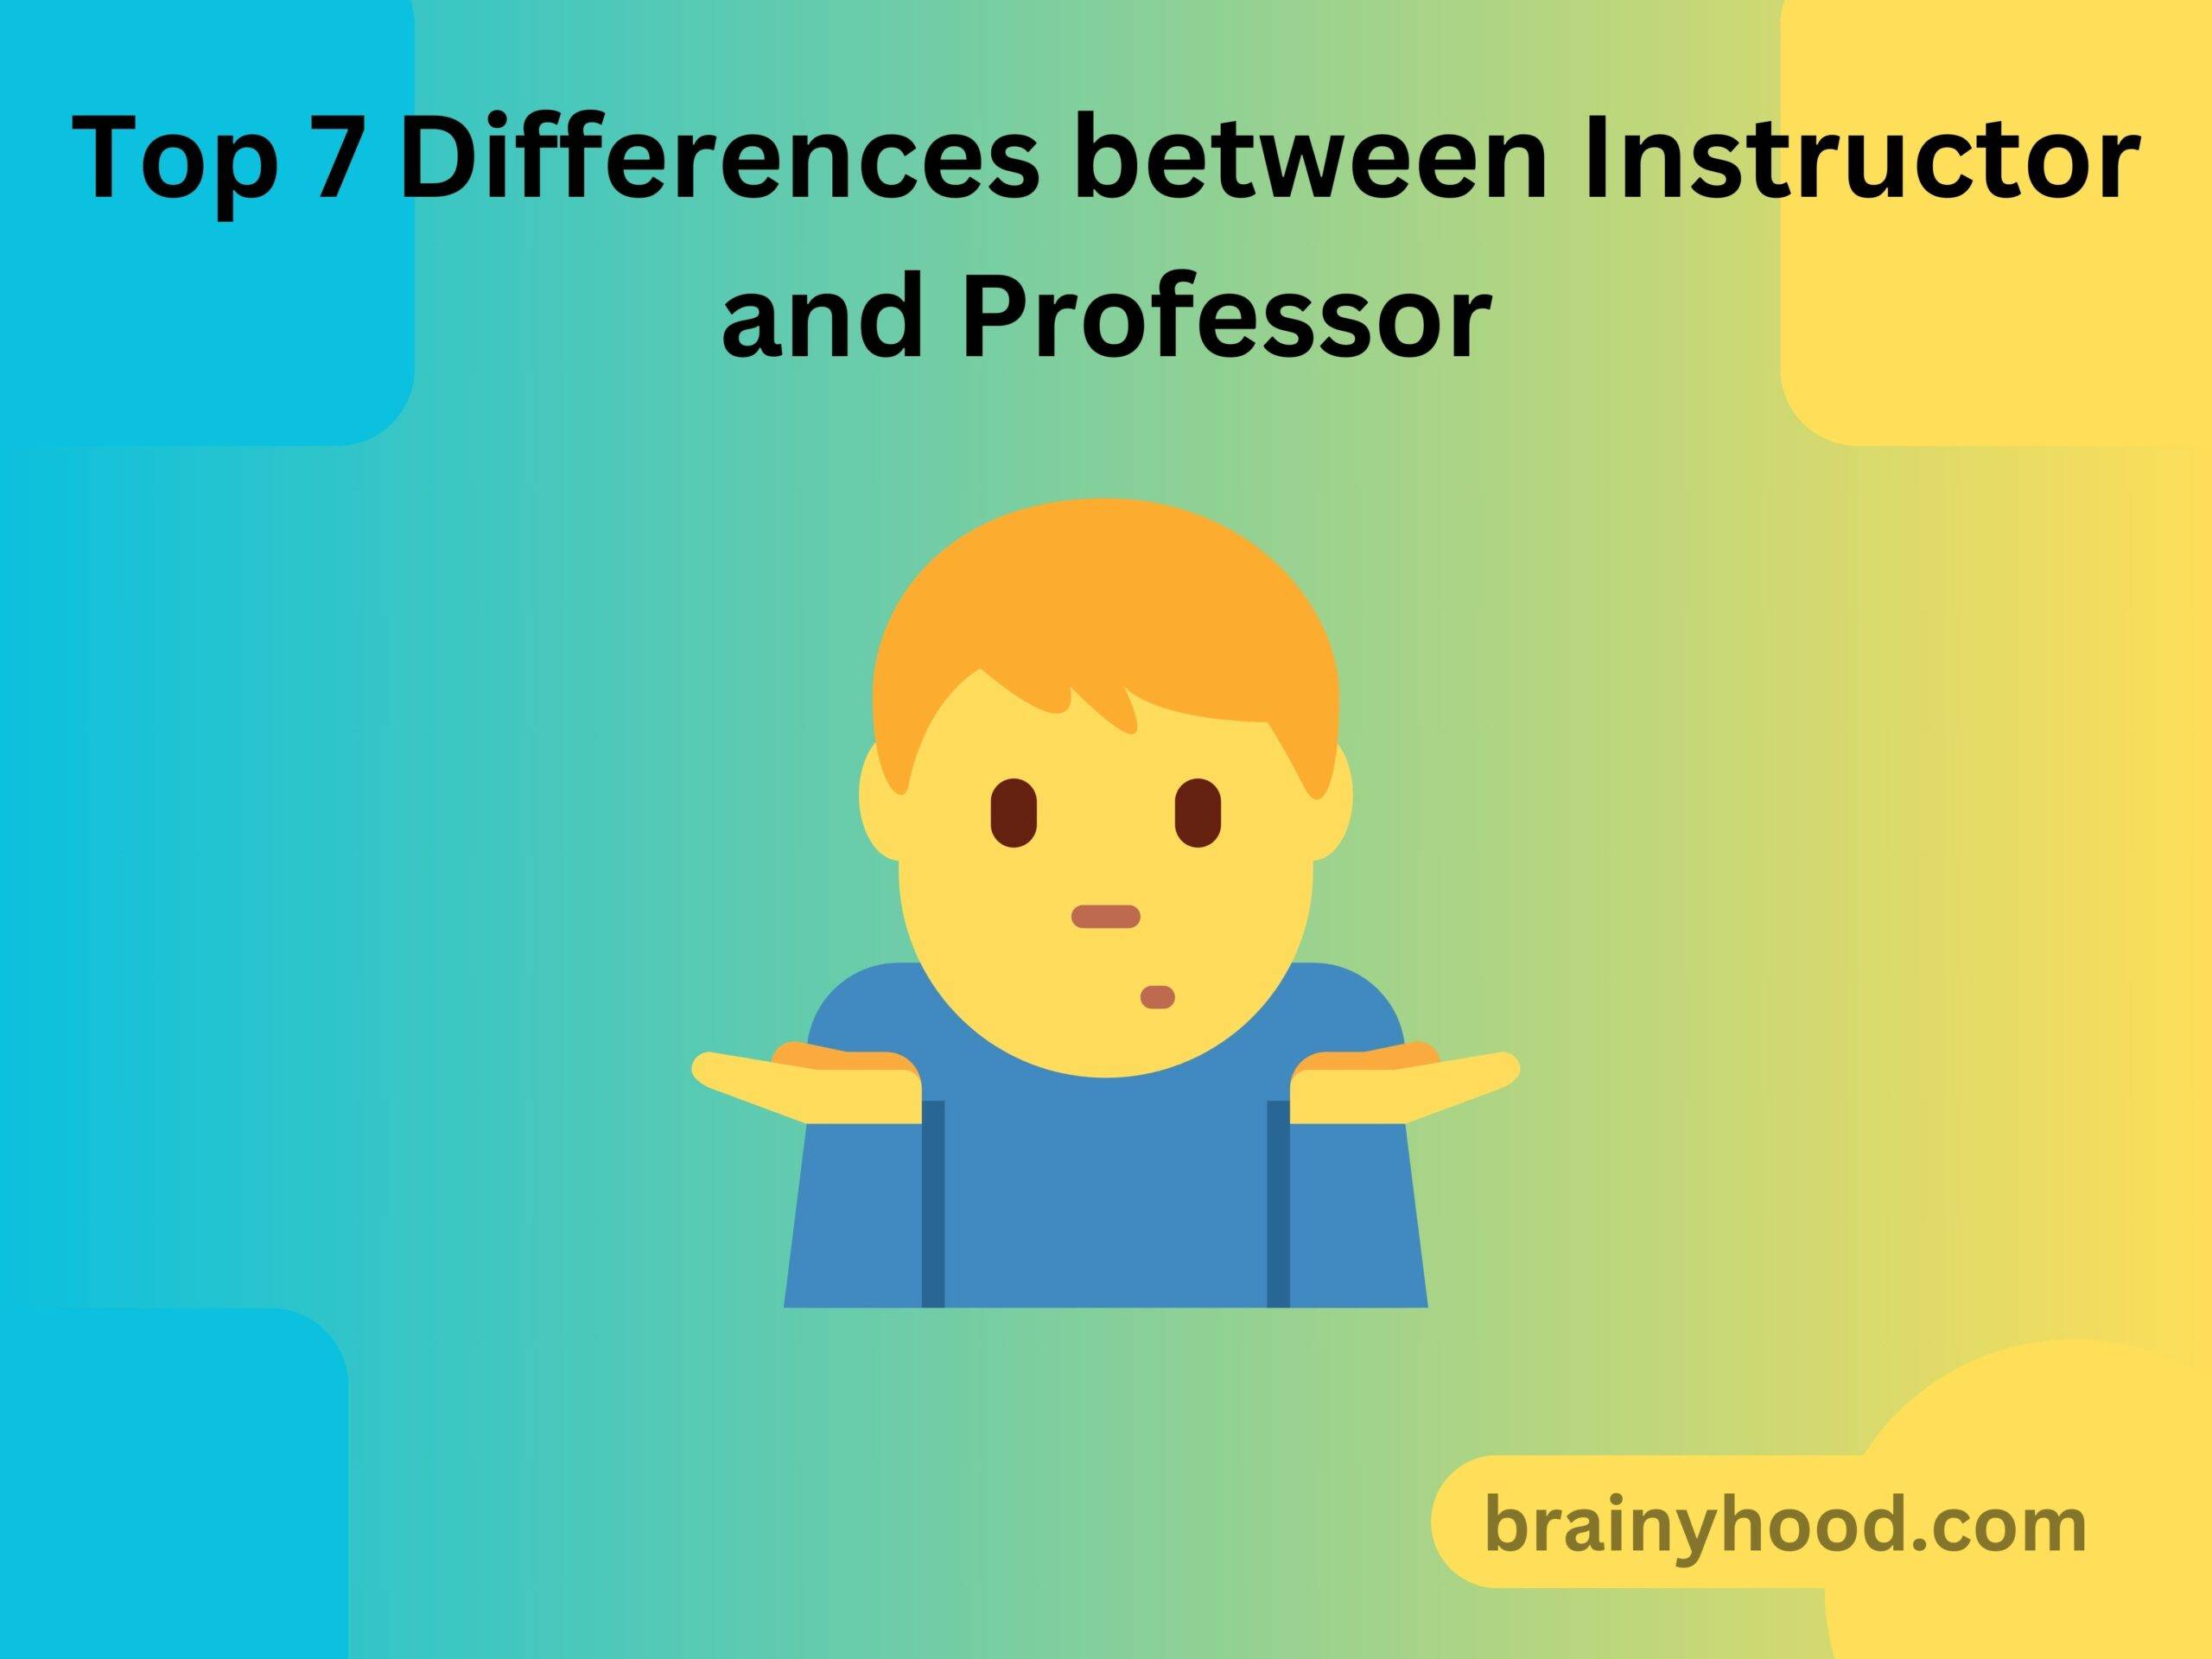 Top 7 Differences between Instructor and Professor